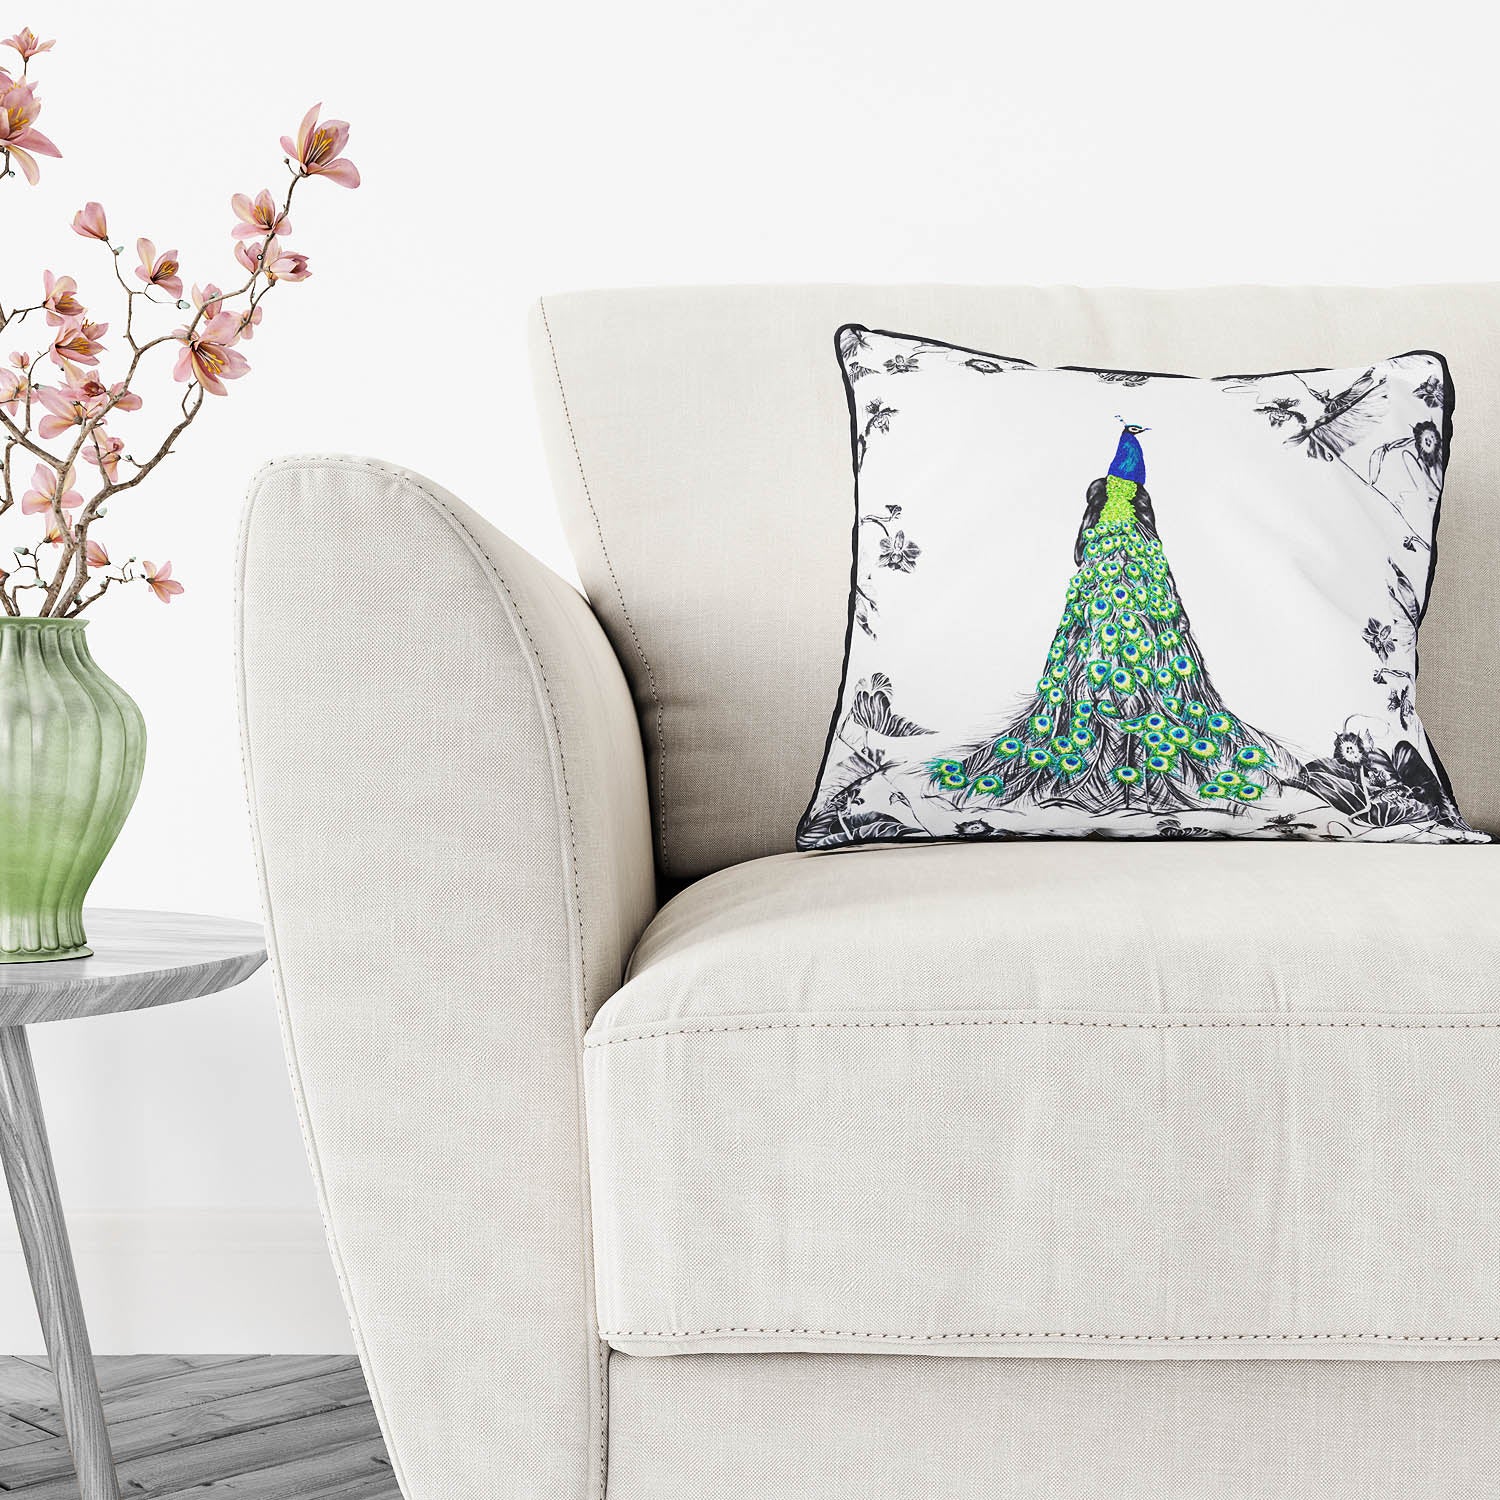 Hand embroidered green peacock cushion on chair 